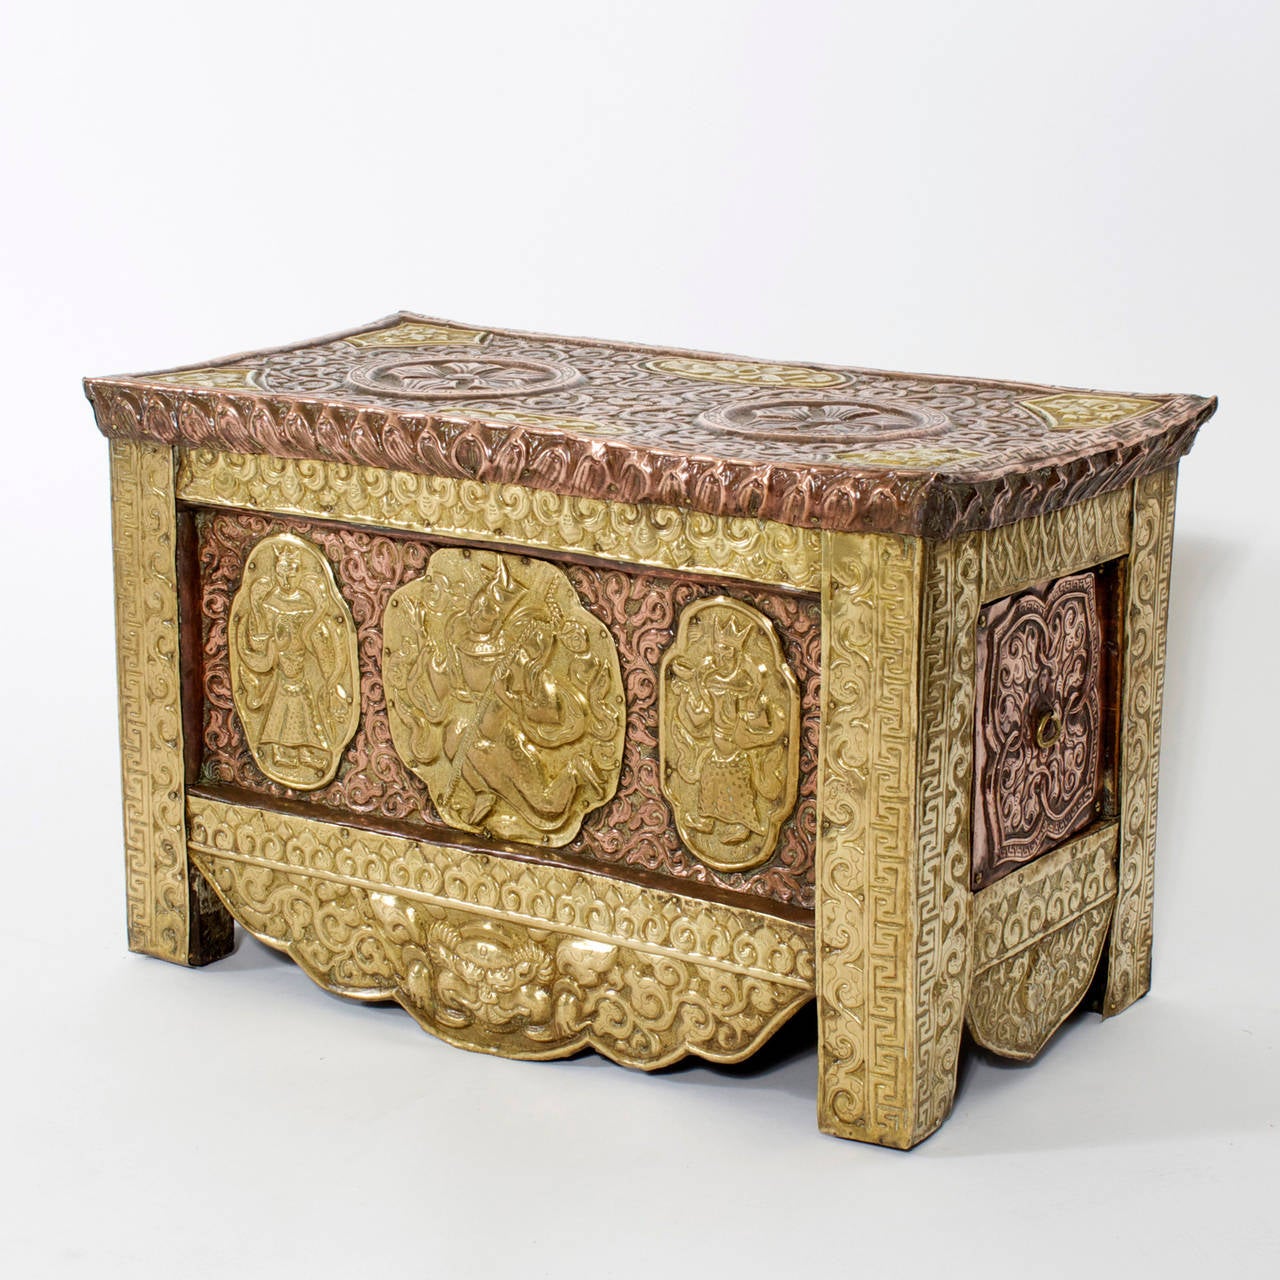 Exotic one drawer faux box made of wood and completely clad with elaborate brass and copper repousse with Greek key, foliate and deity embossing. Custom-made for storing your valuables. The top does not lift on this box the secret drawer is the only